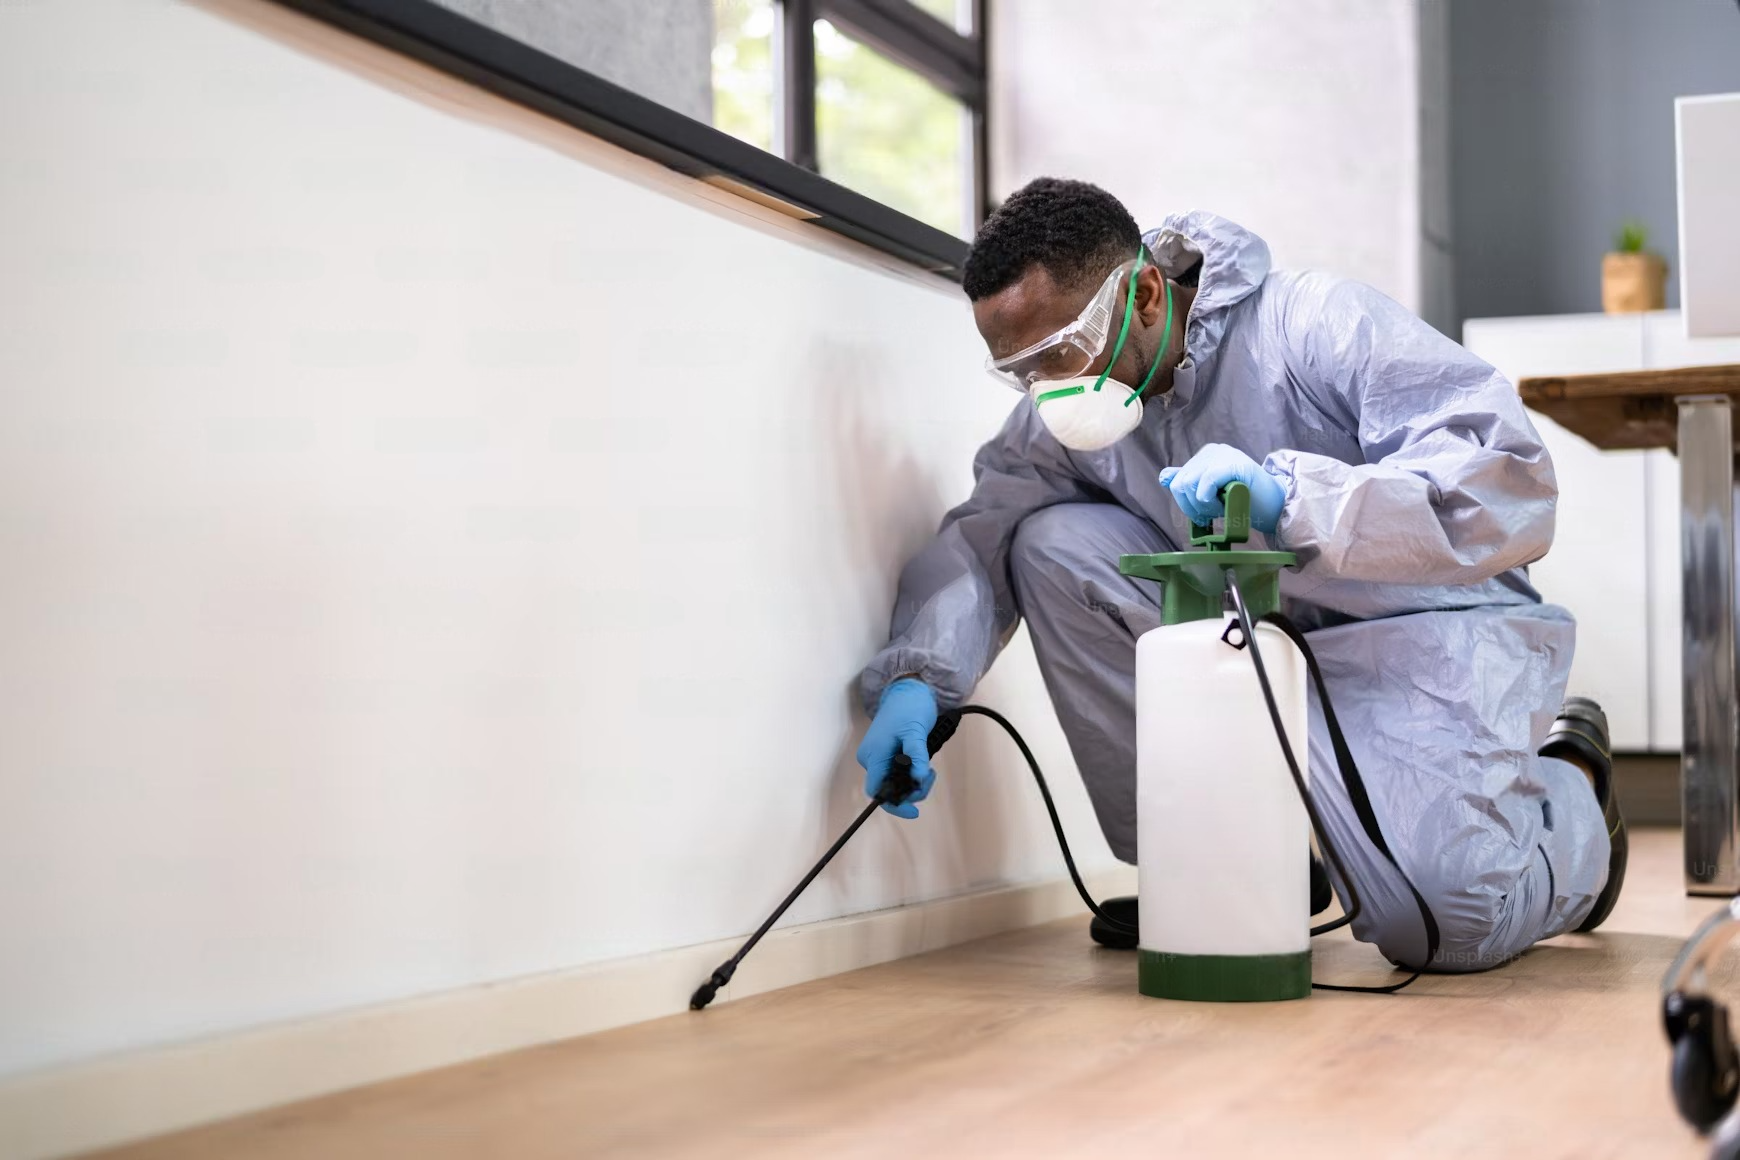 Pest control worker in protective gear spraying insecticide to eliminate pests and ensure a pest-free environment.